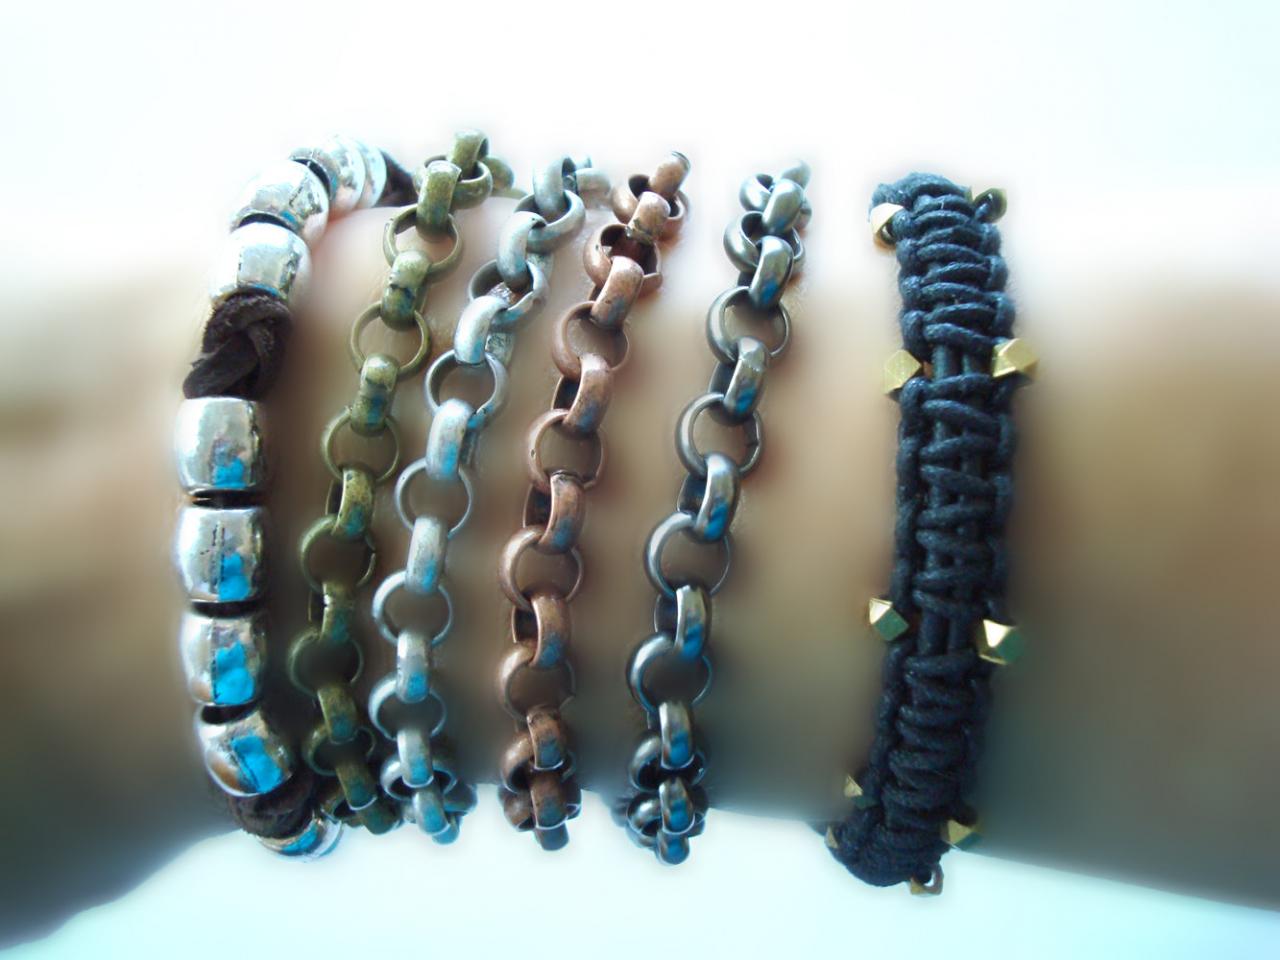 Men's Copper, Brass, Brushed Silver, Or Gunmetal Chain Bracelet. Simple And Masculine.